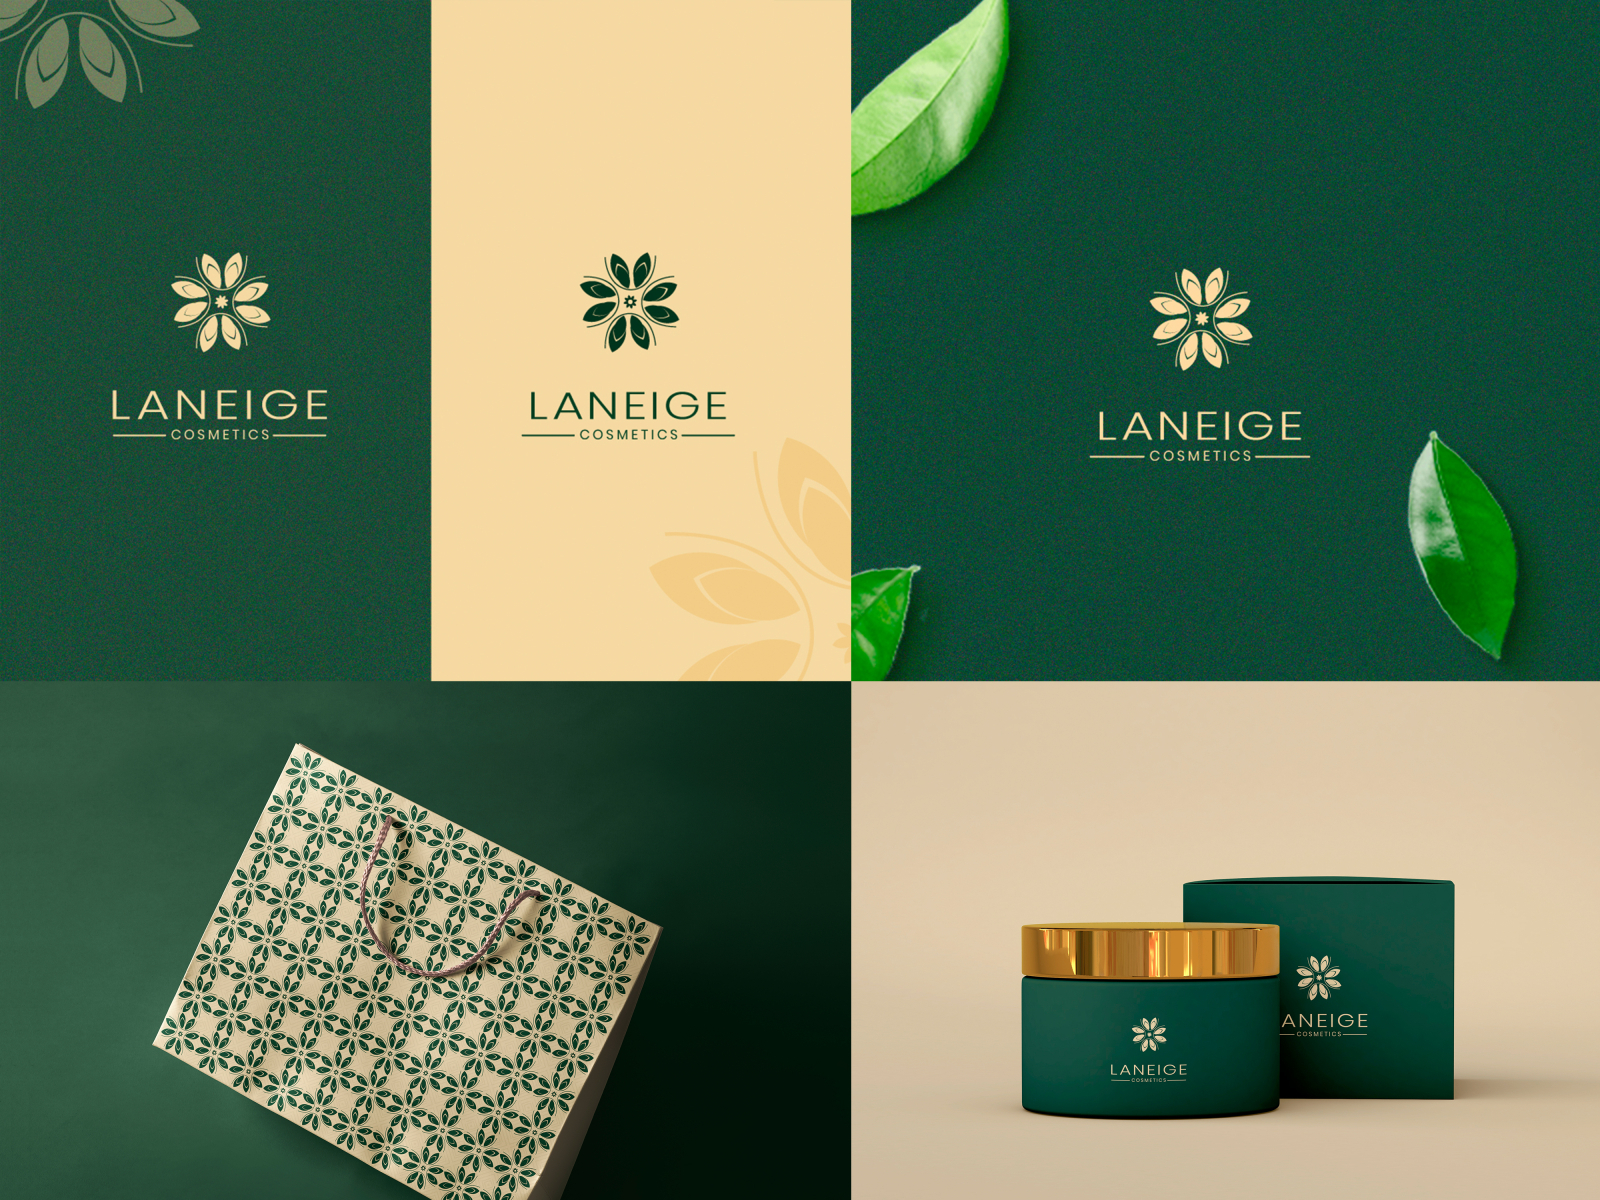 Laneige cosmetics logo by Graphic Design Team on Dribbble